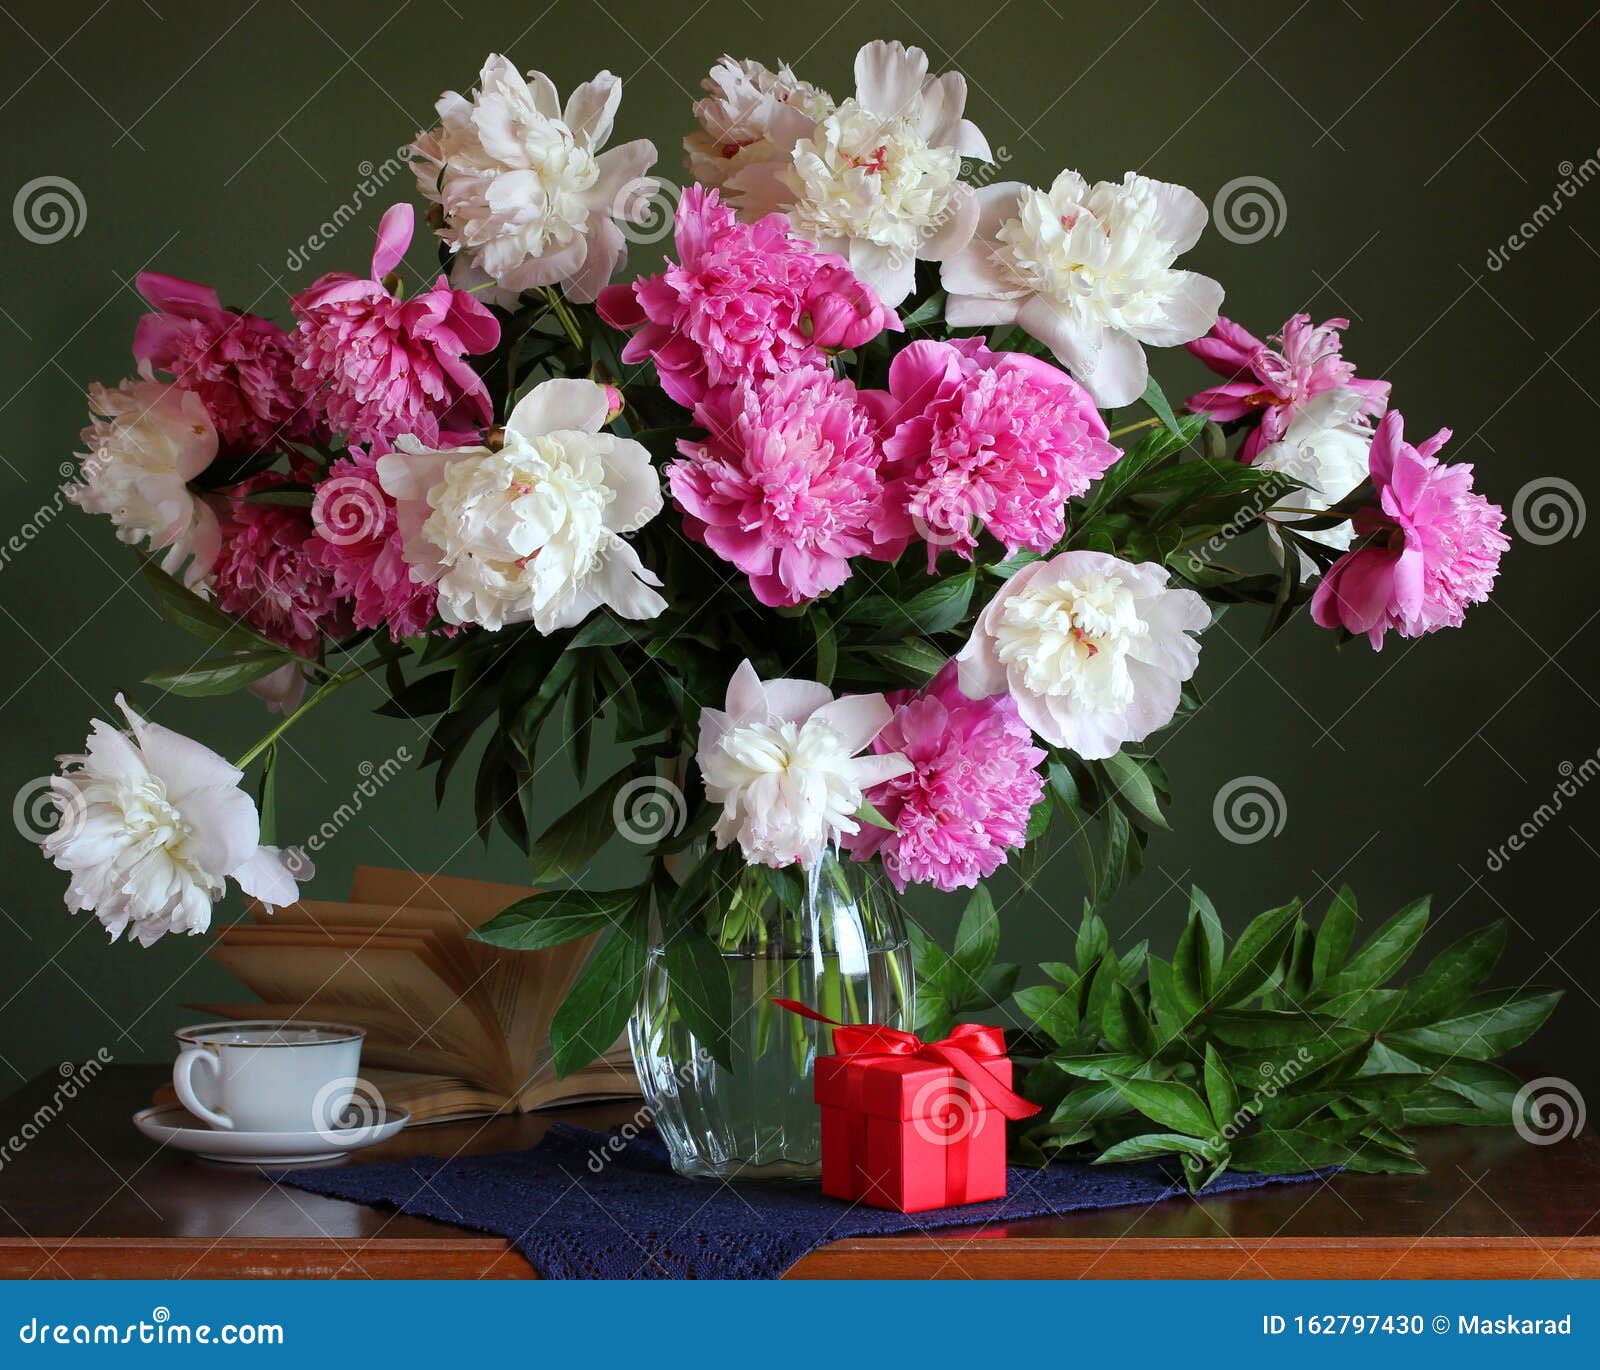 Lush Bouquet of White and Pink Peonies on the Table Stock Photo - Image ...